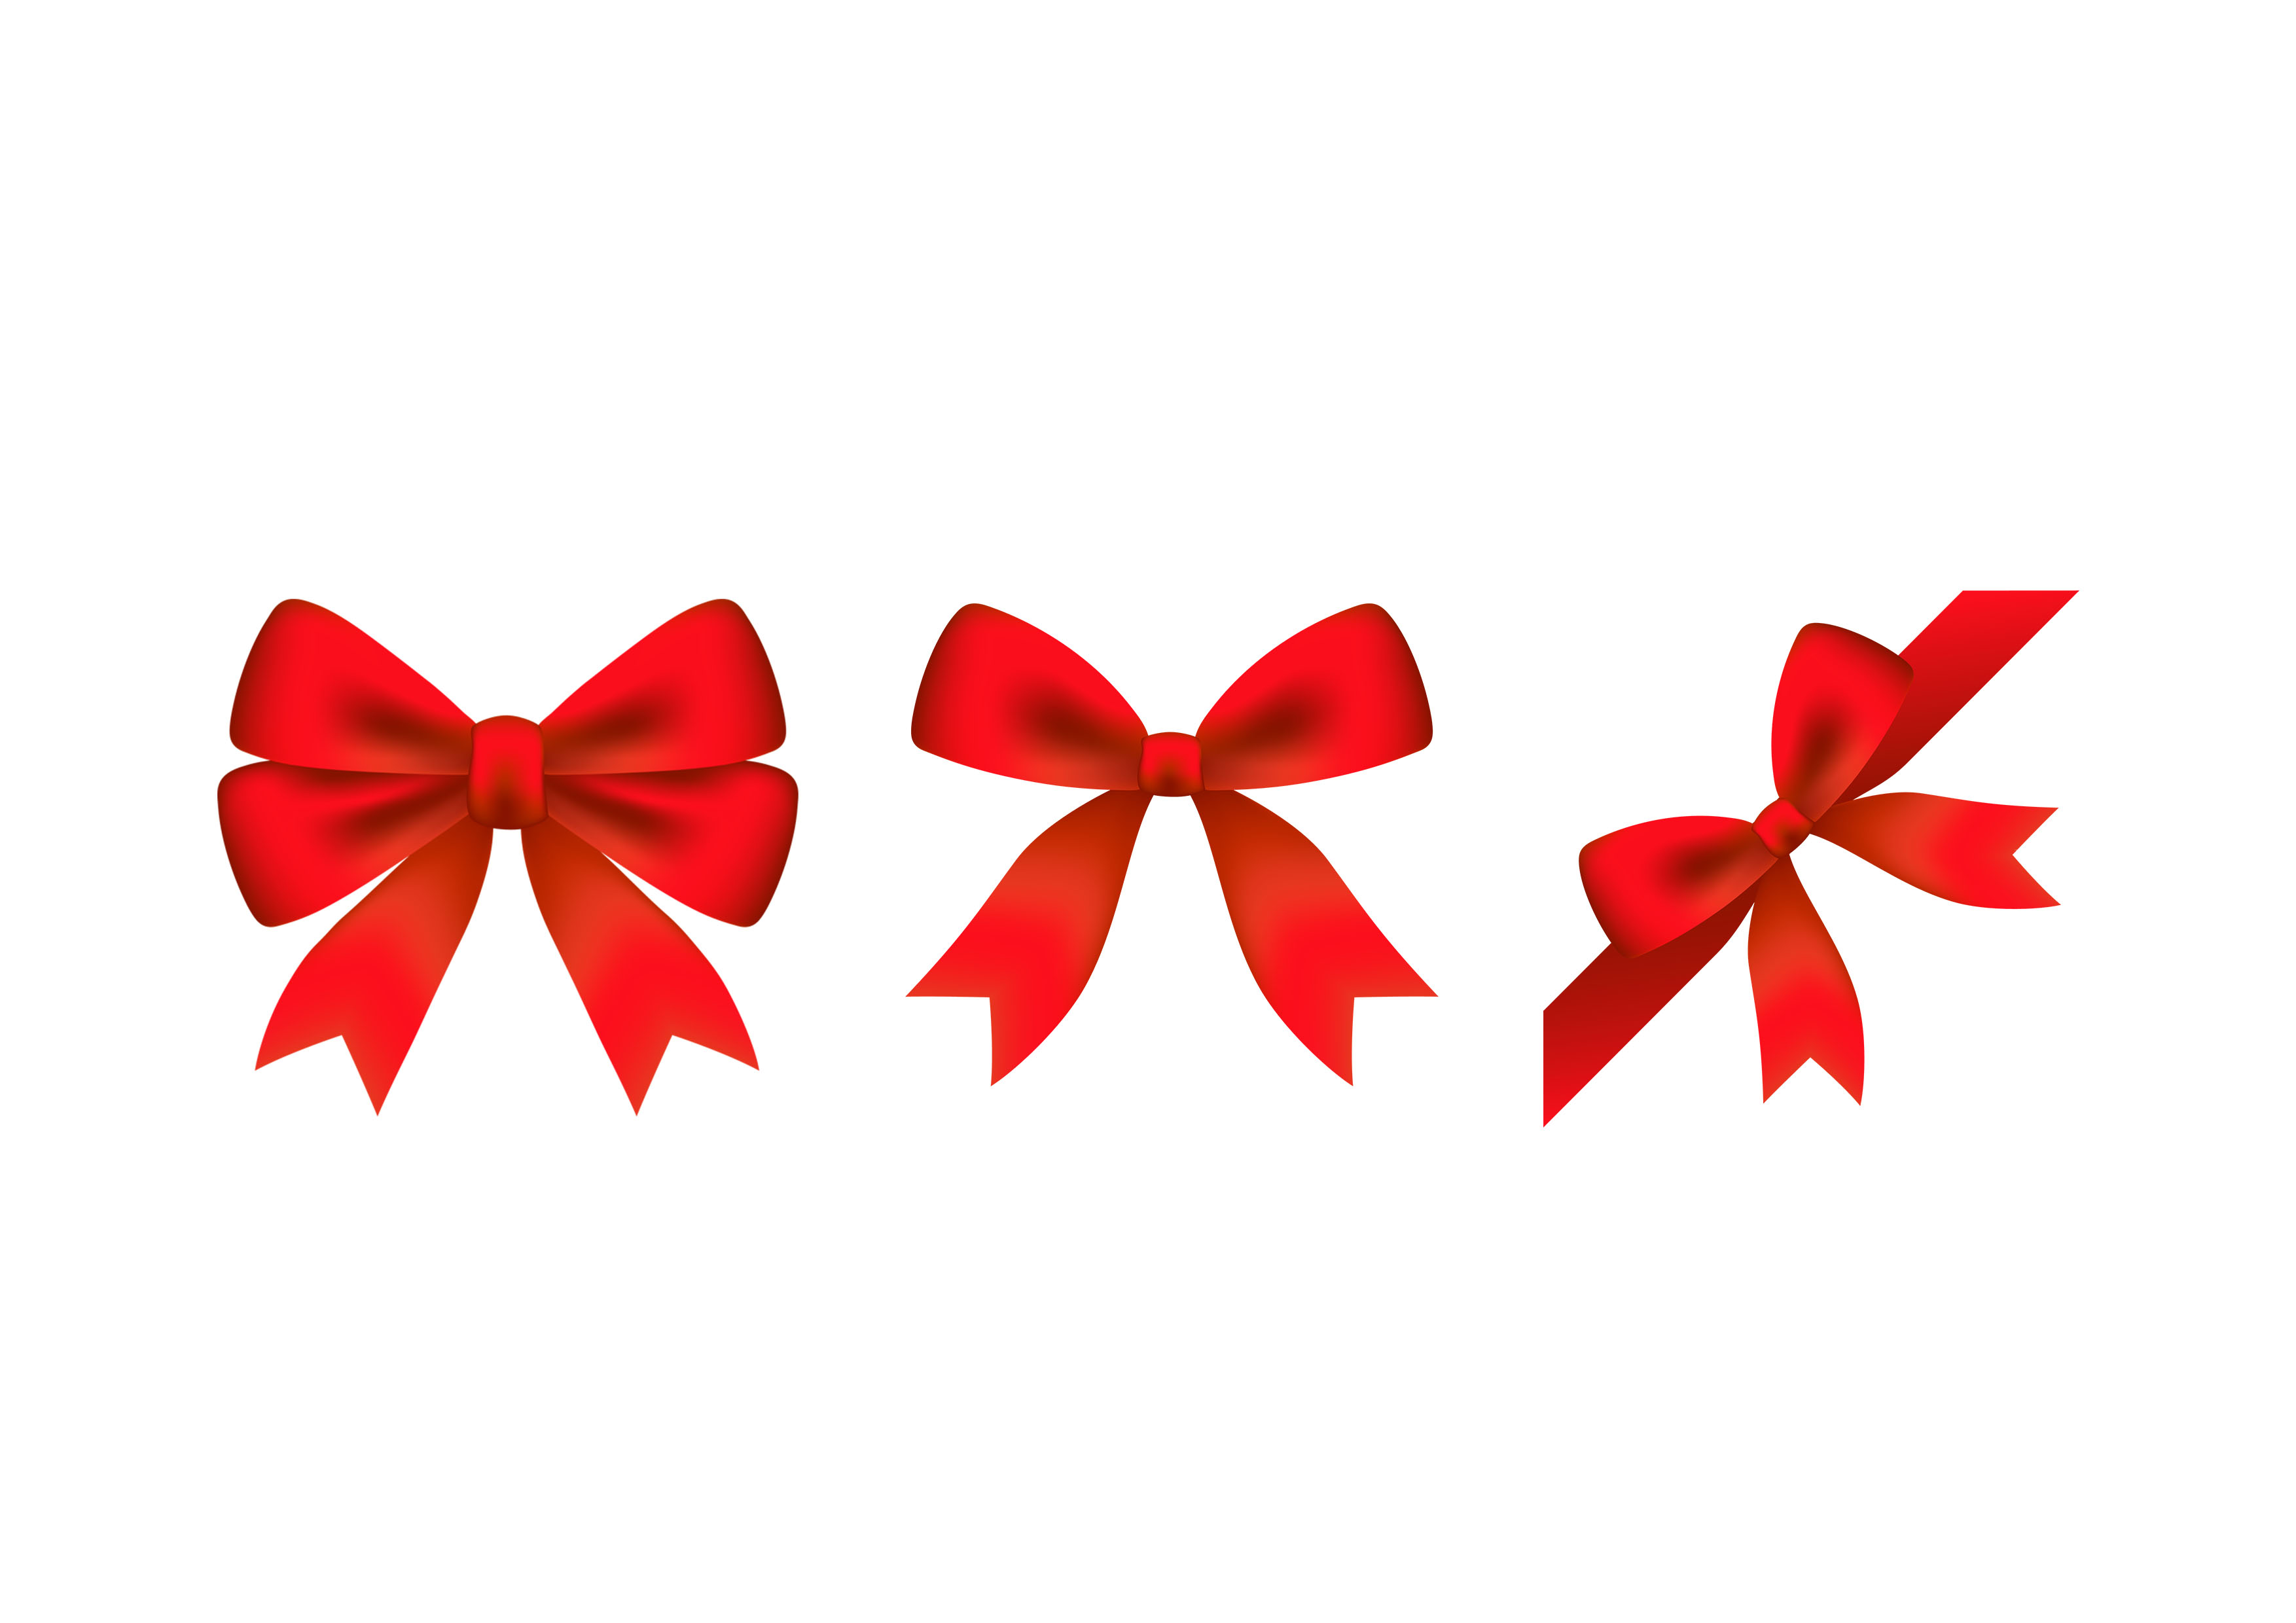 Three red bows on a white background.